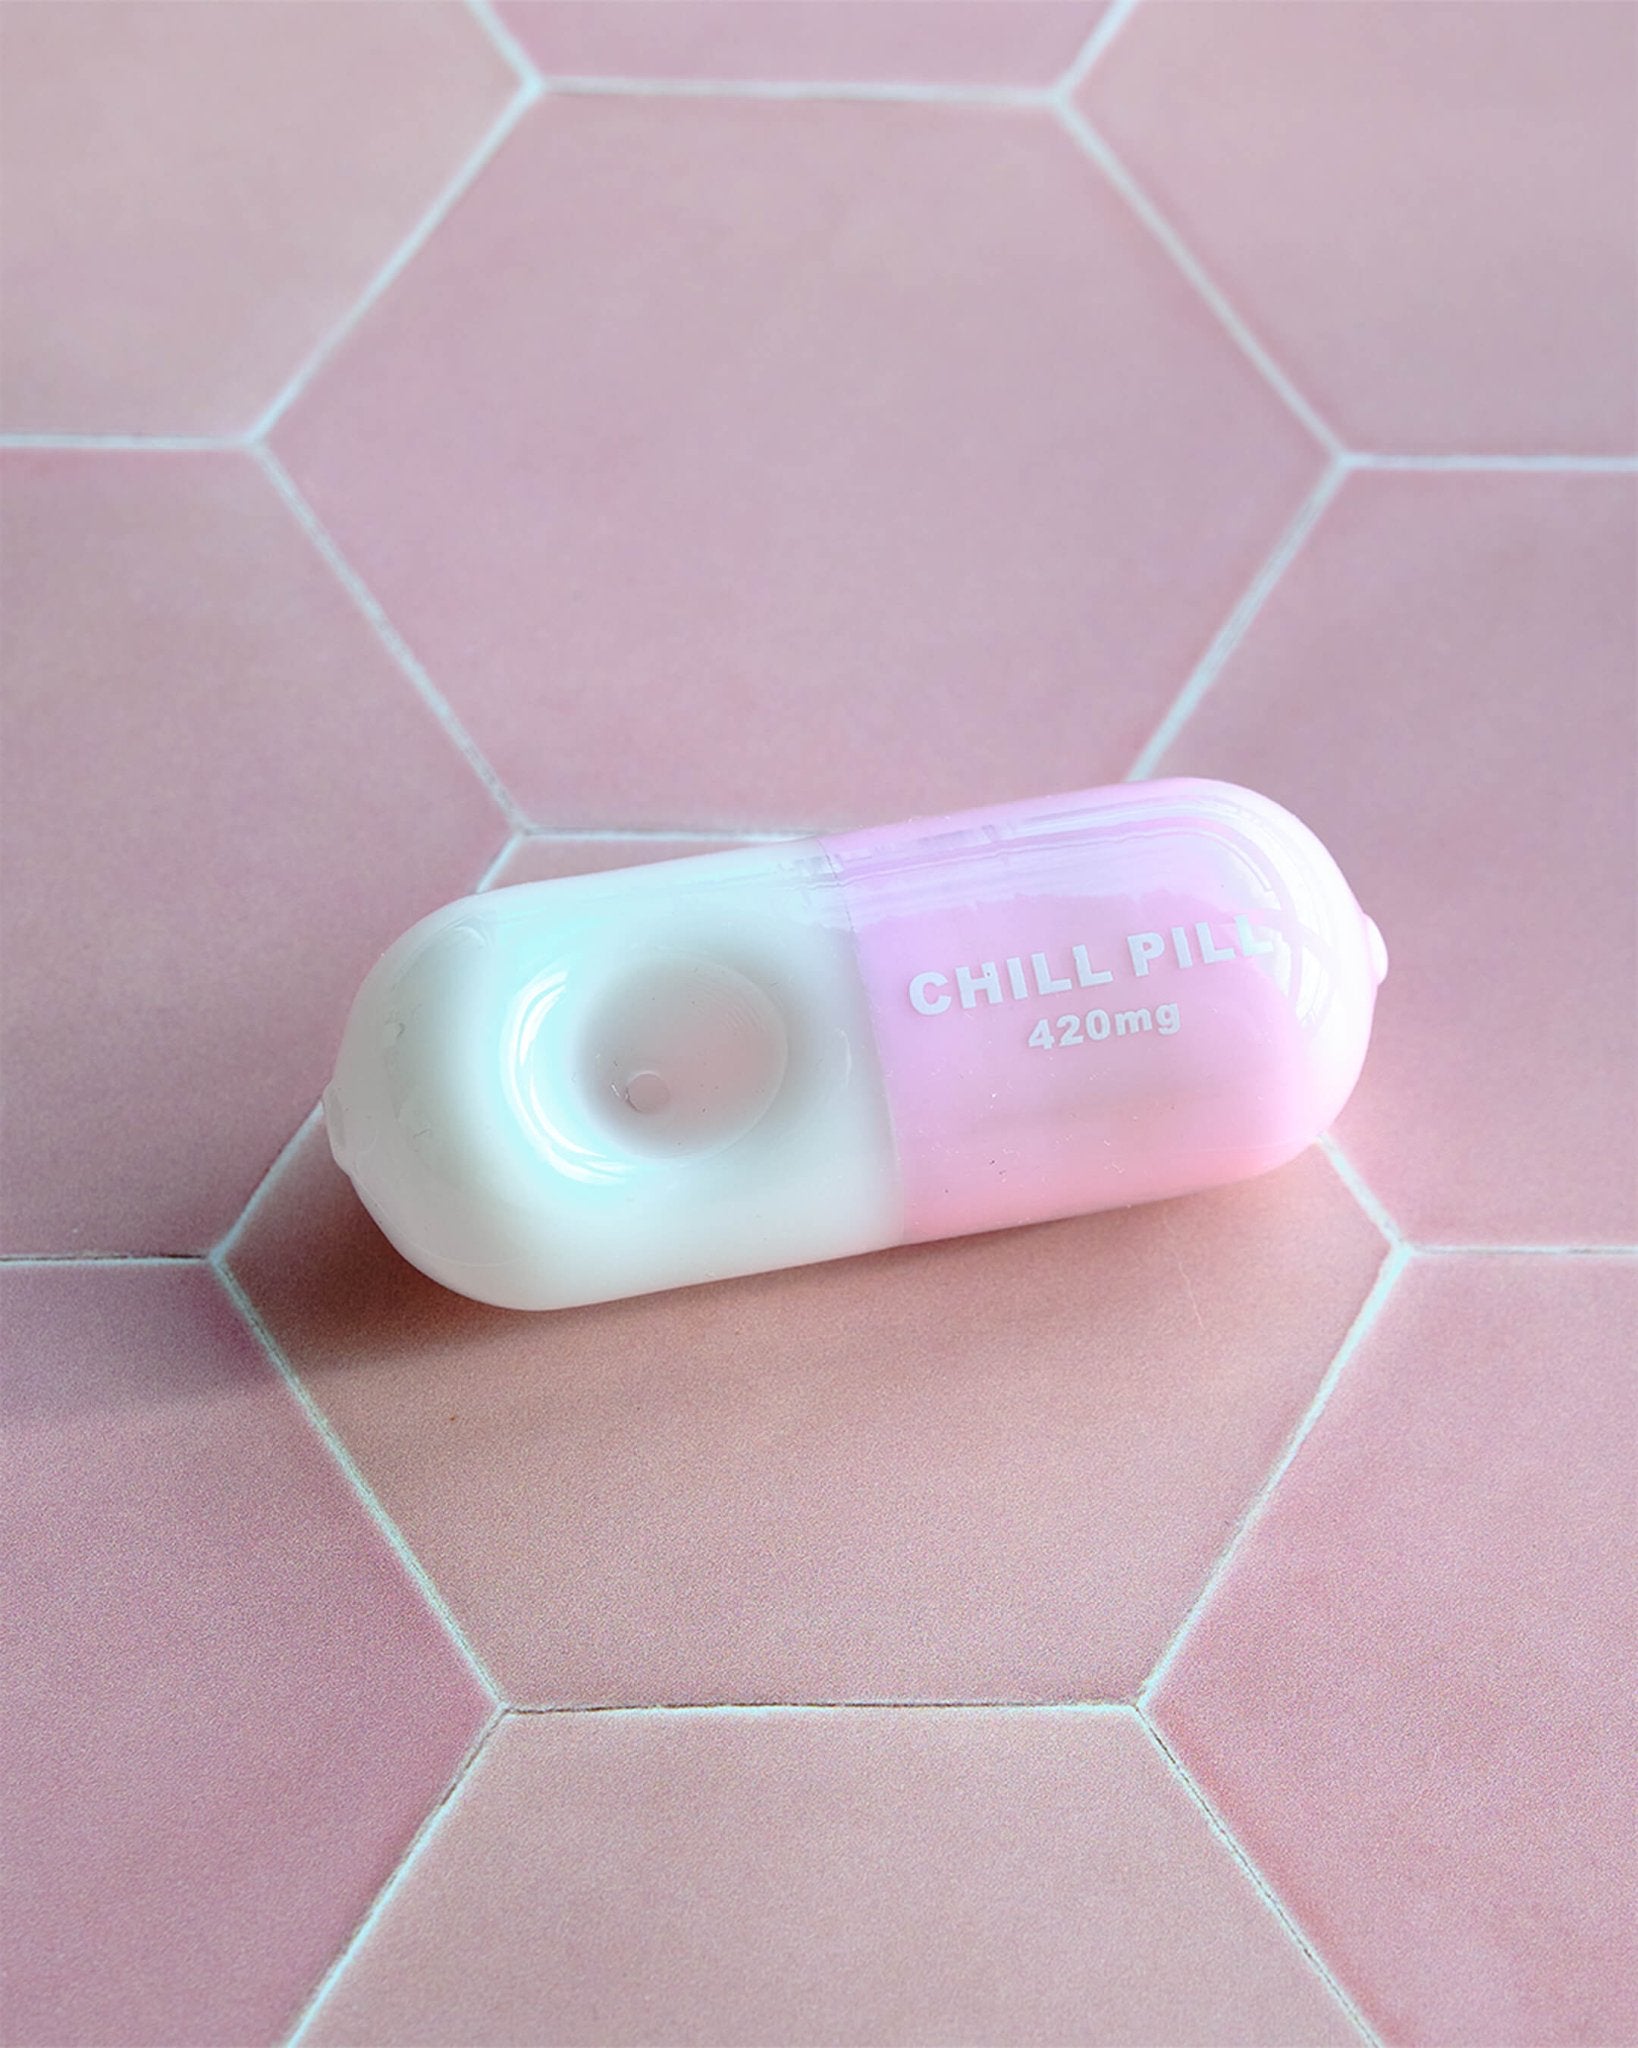 CHILL PILL PIPE - Summer Sunset - milky pink and white color - glass pipe